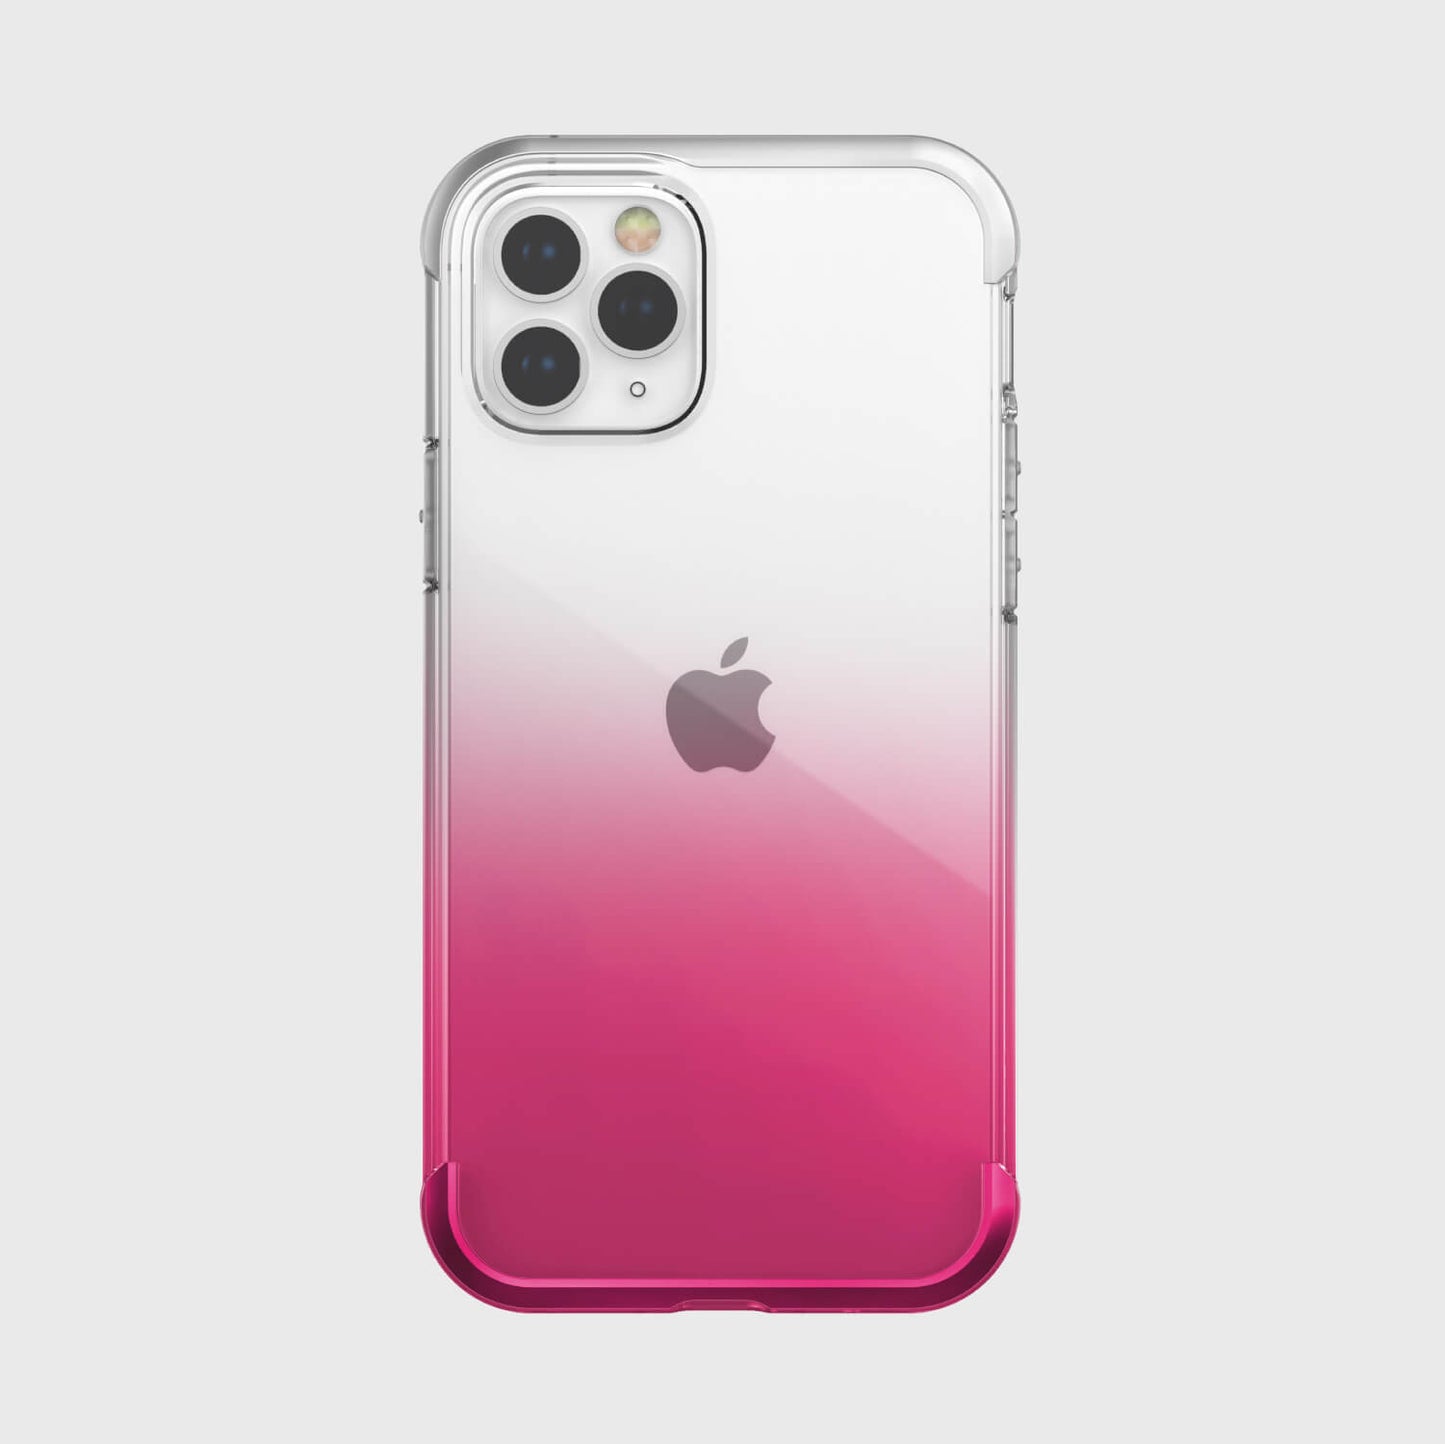 An iPhone 12 & iPhone 12 Pro case - AIR in pink and white with 13-foot drop protection by Raptic.